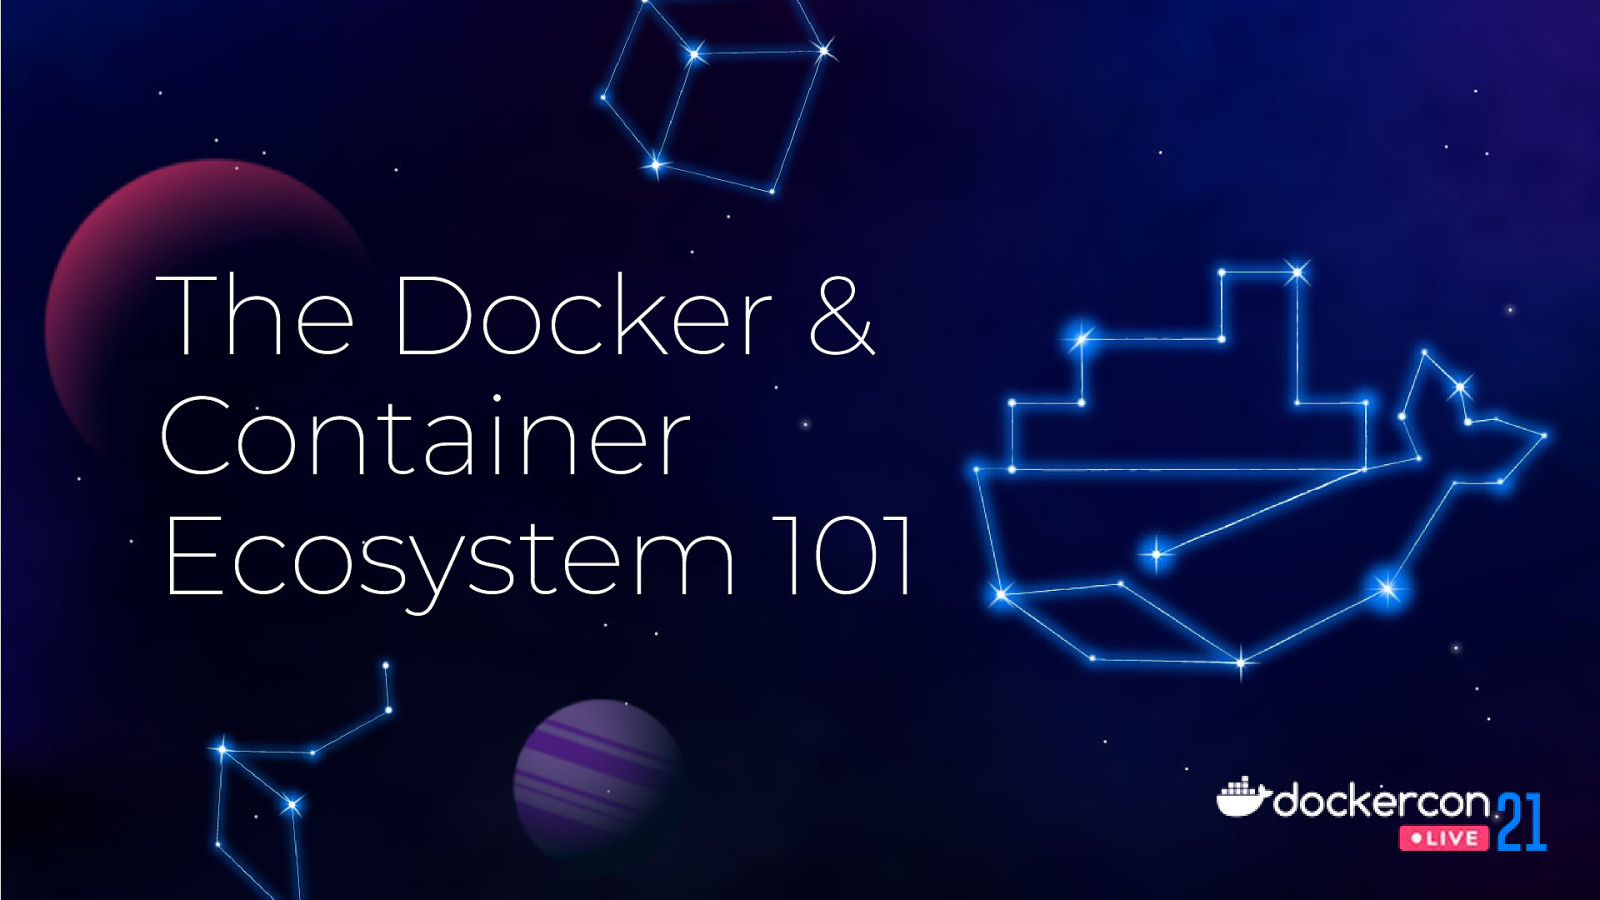 The Docker & Container Ecosystem 101